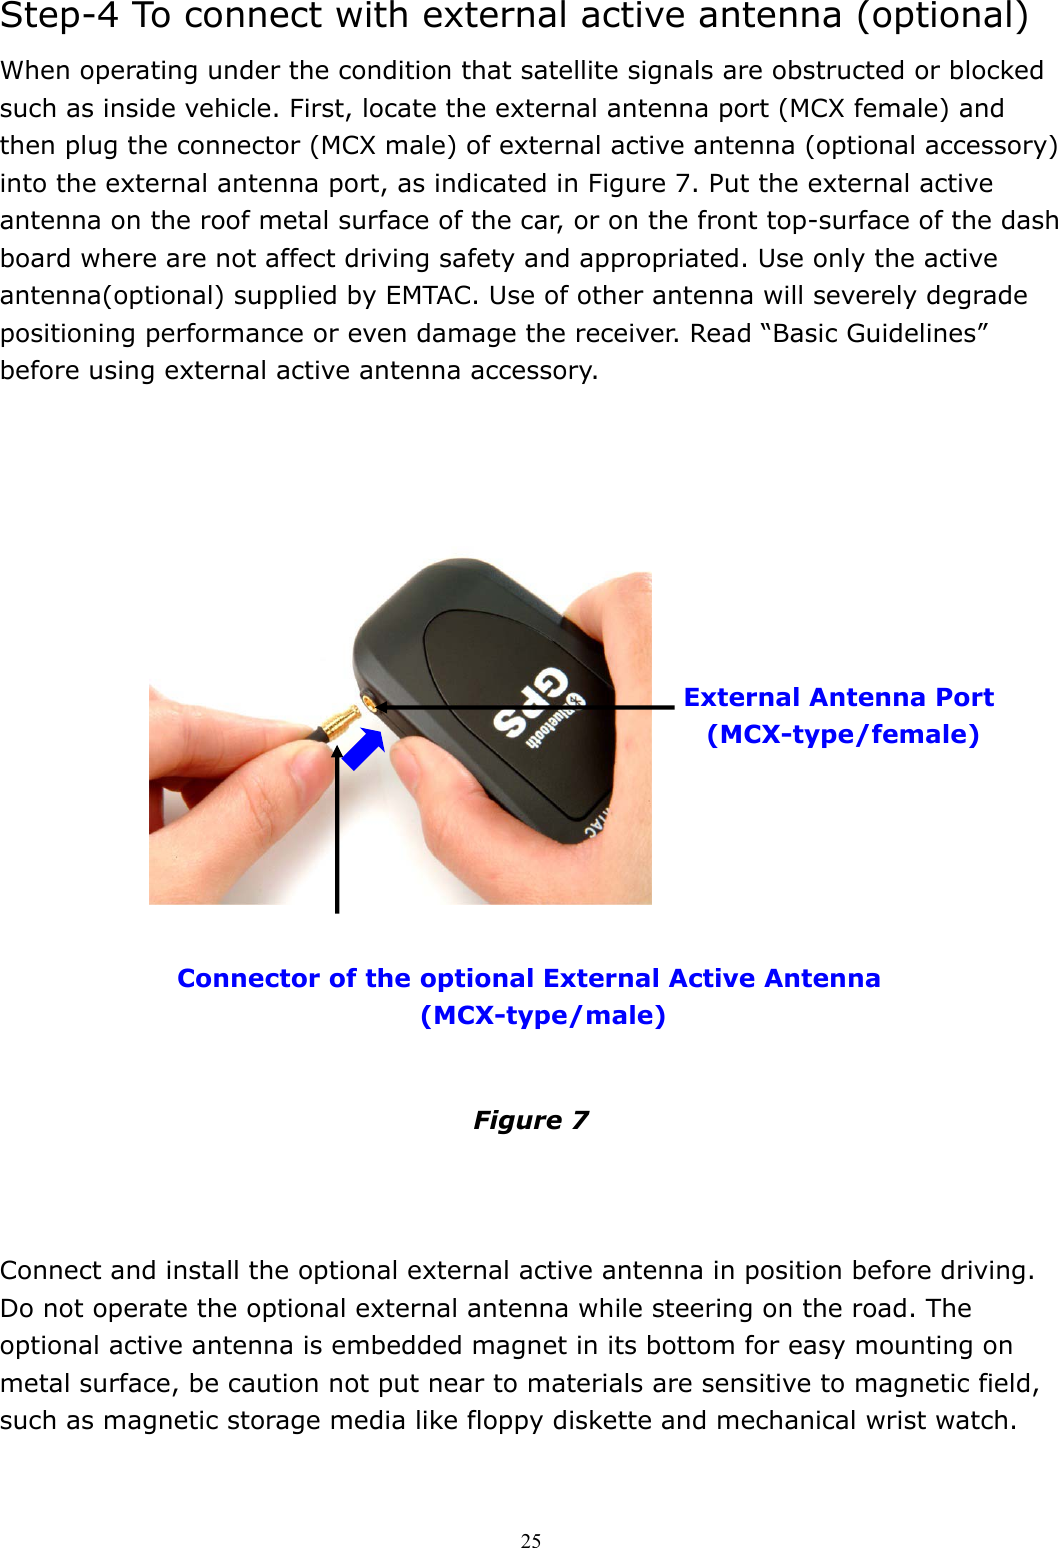  25Step-4 To connect with external active antenna (optional) When operating under the condition that satellite signals are obstructed or blocked such as inside vehicle. First, locate the external antenna port (MCX female) and then plug the connector (MCX male) of external active antenna (optional accessory) into the external antenna port, as indicated in Figure 7. Put the external active antenna on the roof metal surface of the car, or on the front top-surface of the dash board where are not affect driving safety and appropriated. Use only the active antenna(optional) supplied by EMTAC. Use of other antenna will severely degrade positioning performance or even damage the receiver. Read “Basic Guidelines” before using external active antenna accessory.                       Figure 7    Connect and install the optional external active antenna in position before driving. Do not operate the optional external antenna while steering on the road. The optional active antenna is embedded magnet in its bottom for easy mounting on metal surface, be caution not put near to materials are sensitive to magnetic field, such as magnetic storage media like floppy diskette and mechanical wrist watch.   External Antenna Port (MCX-type/female)  Connector of the optional External Active Antenna   (MCX-type/male) 